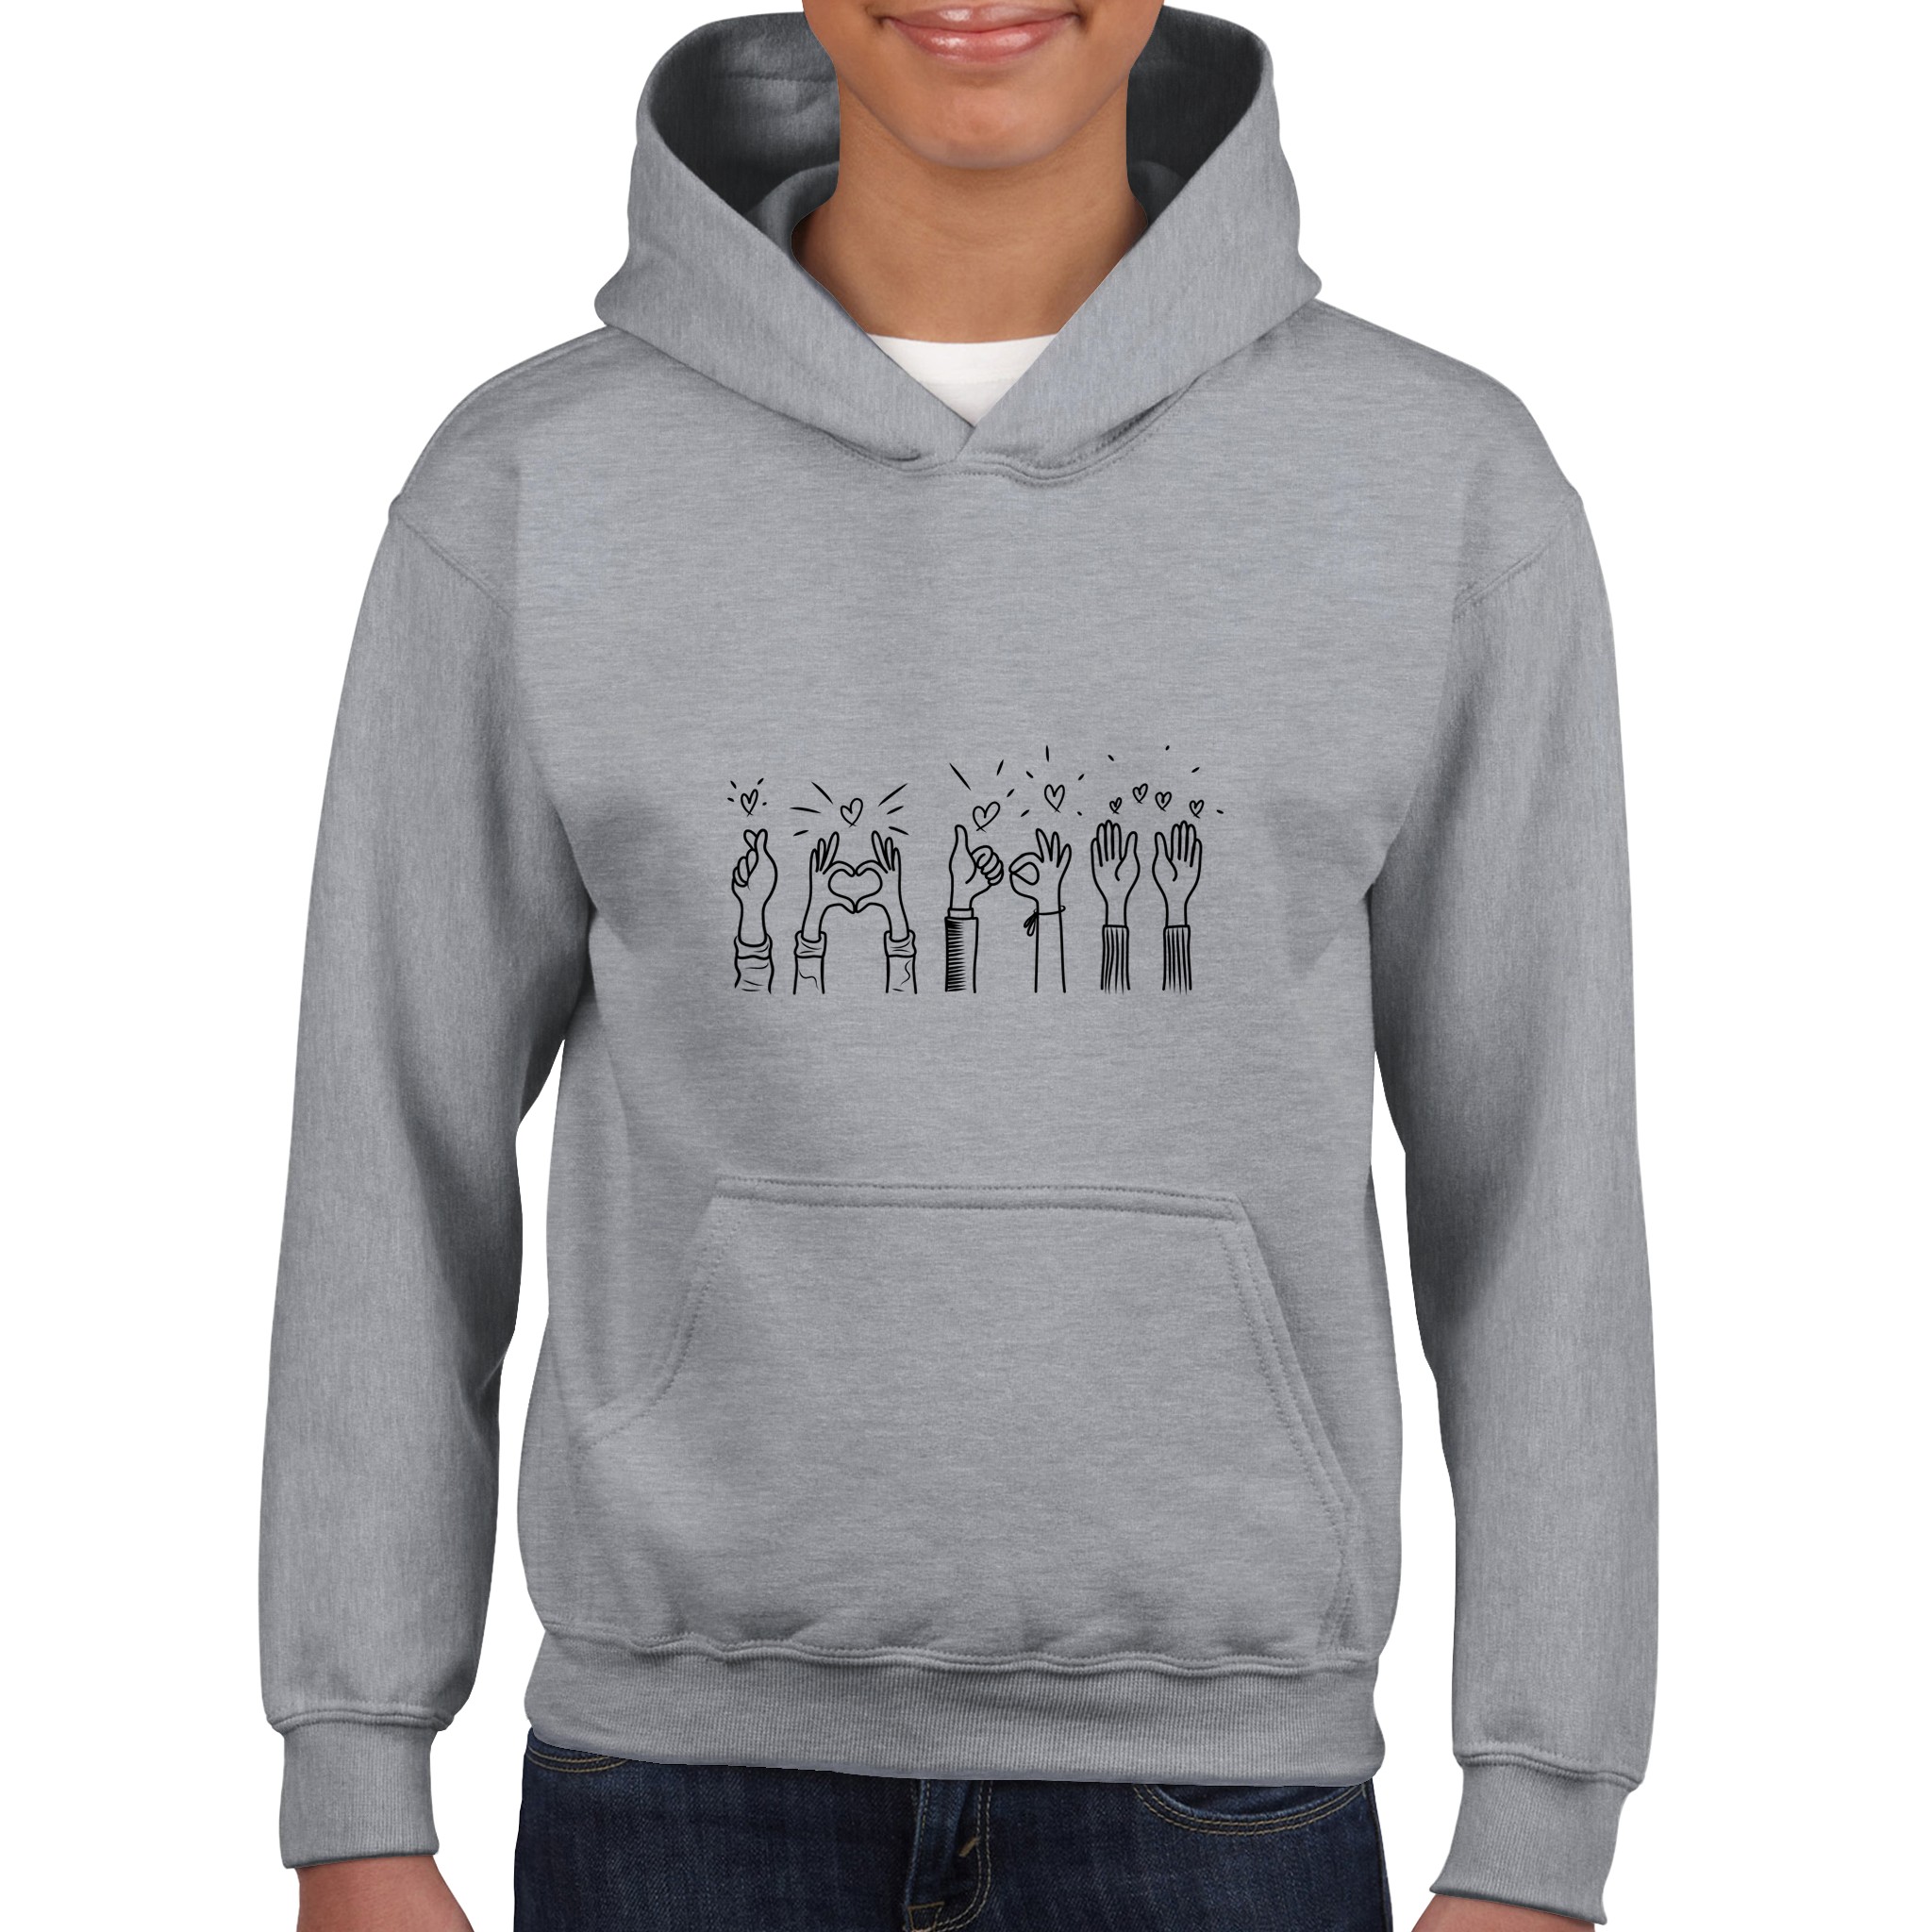 Hands up for love Kids Pullover Hoodie